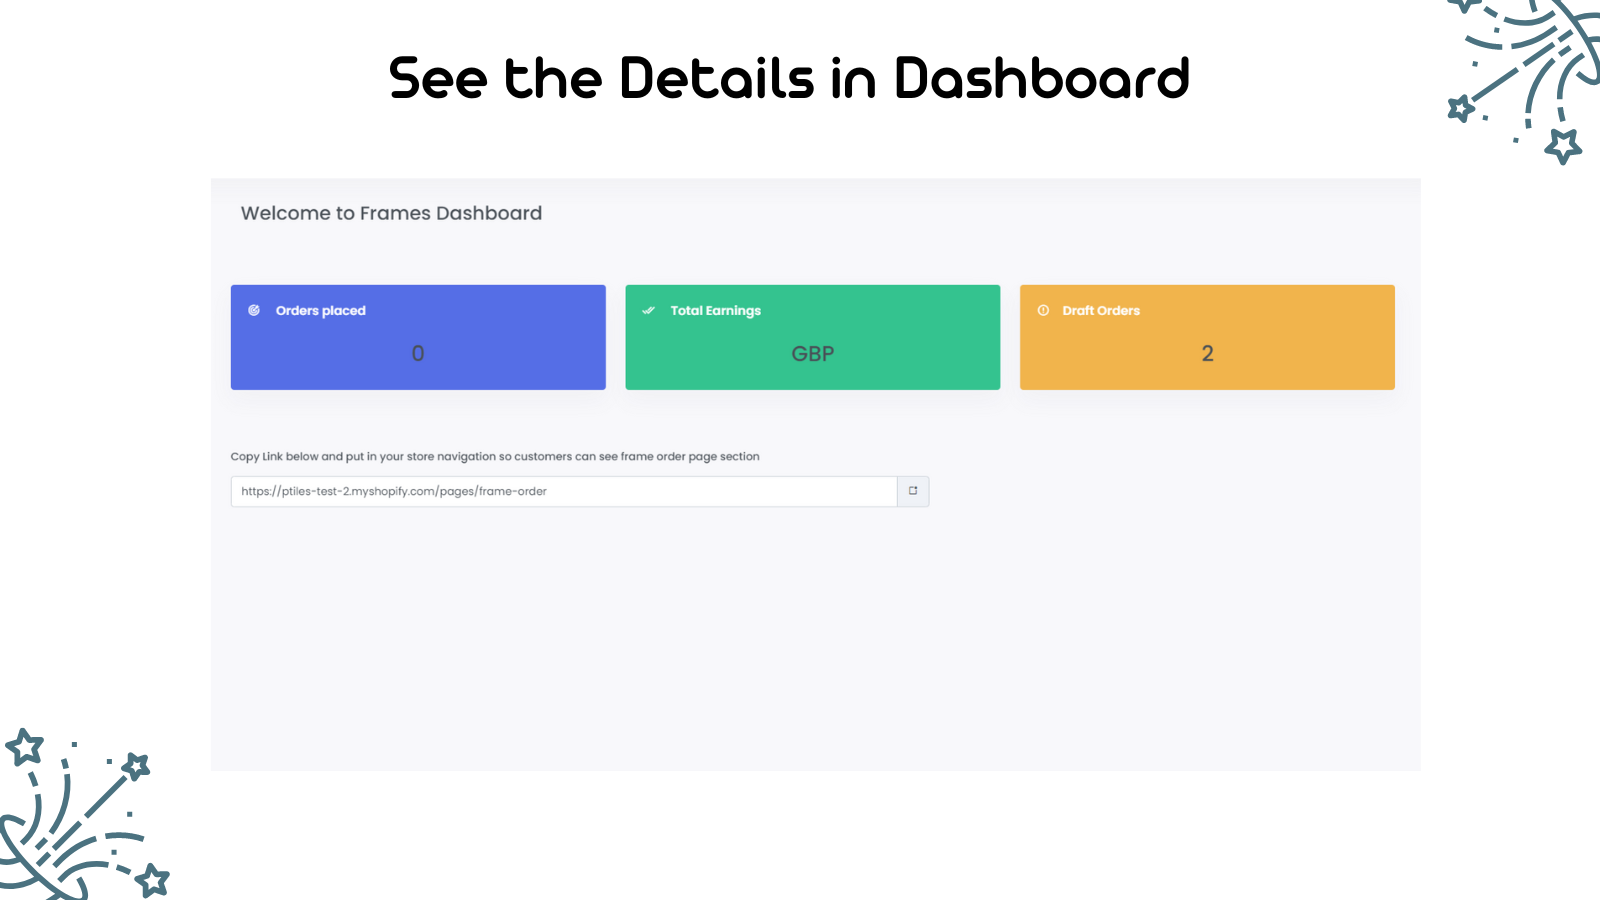 See the details in the Dashboard.